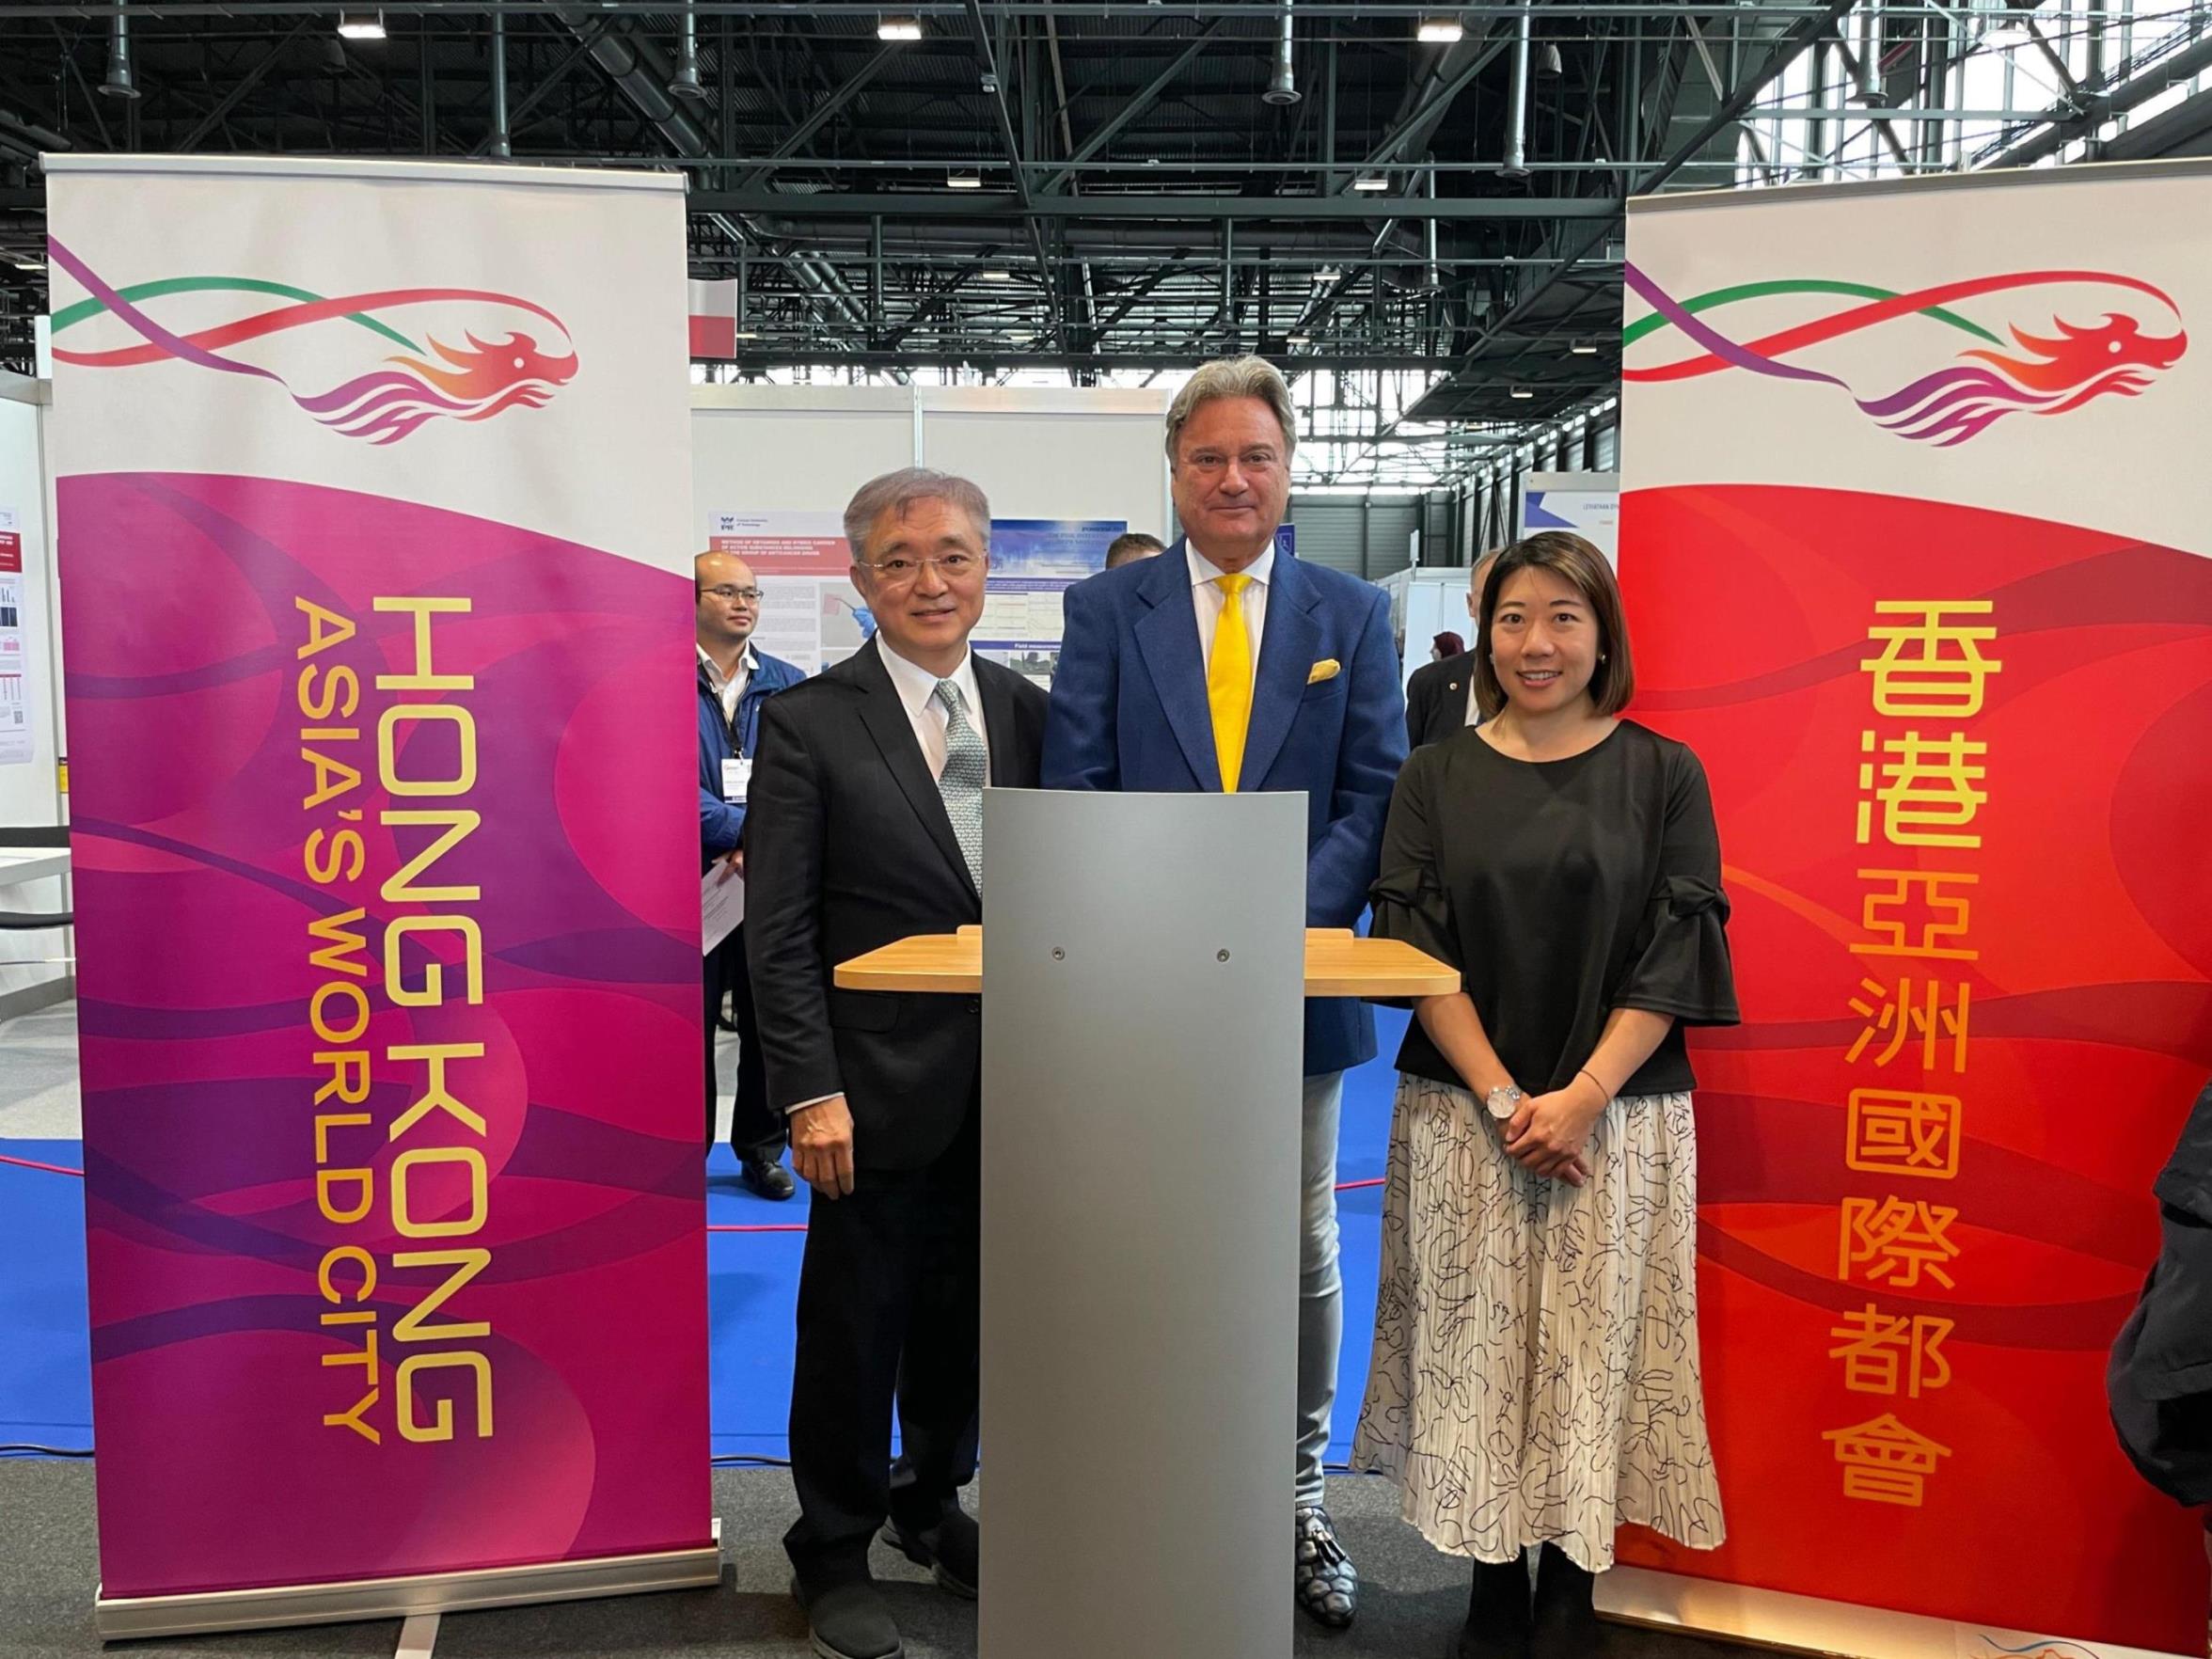 Hong Kong presents innovations at International Exhibition of Inventions in Geneva